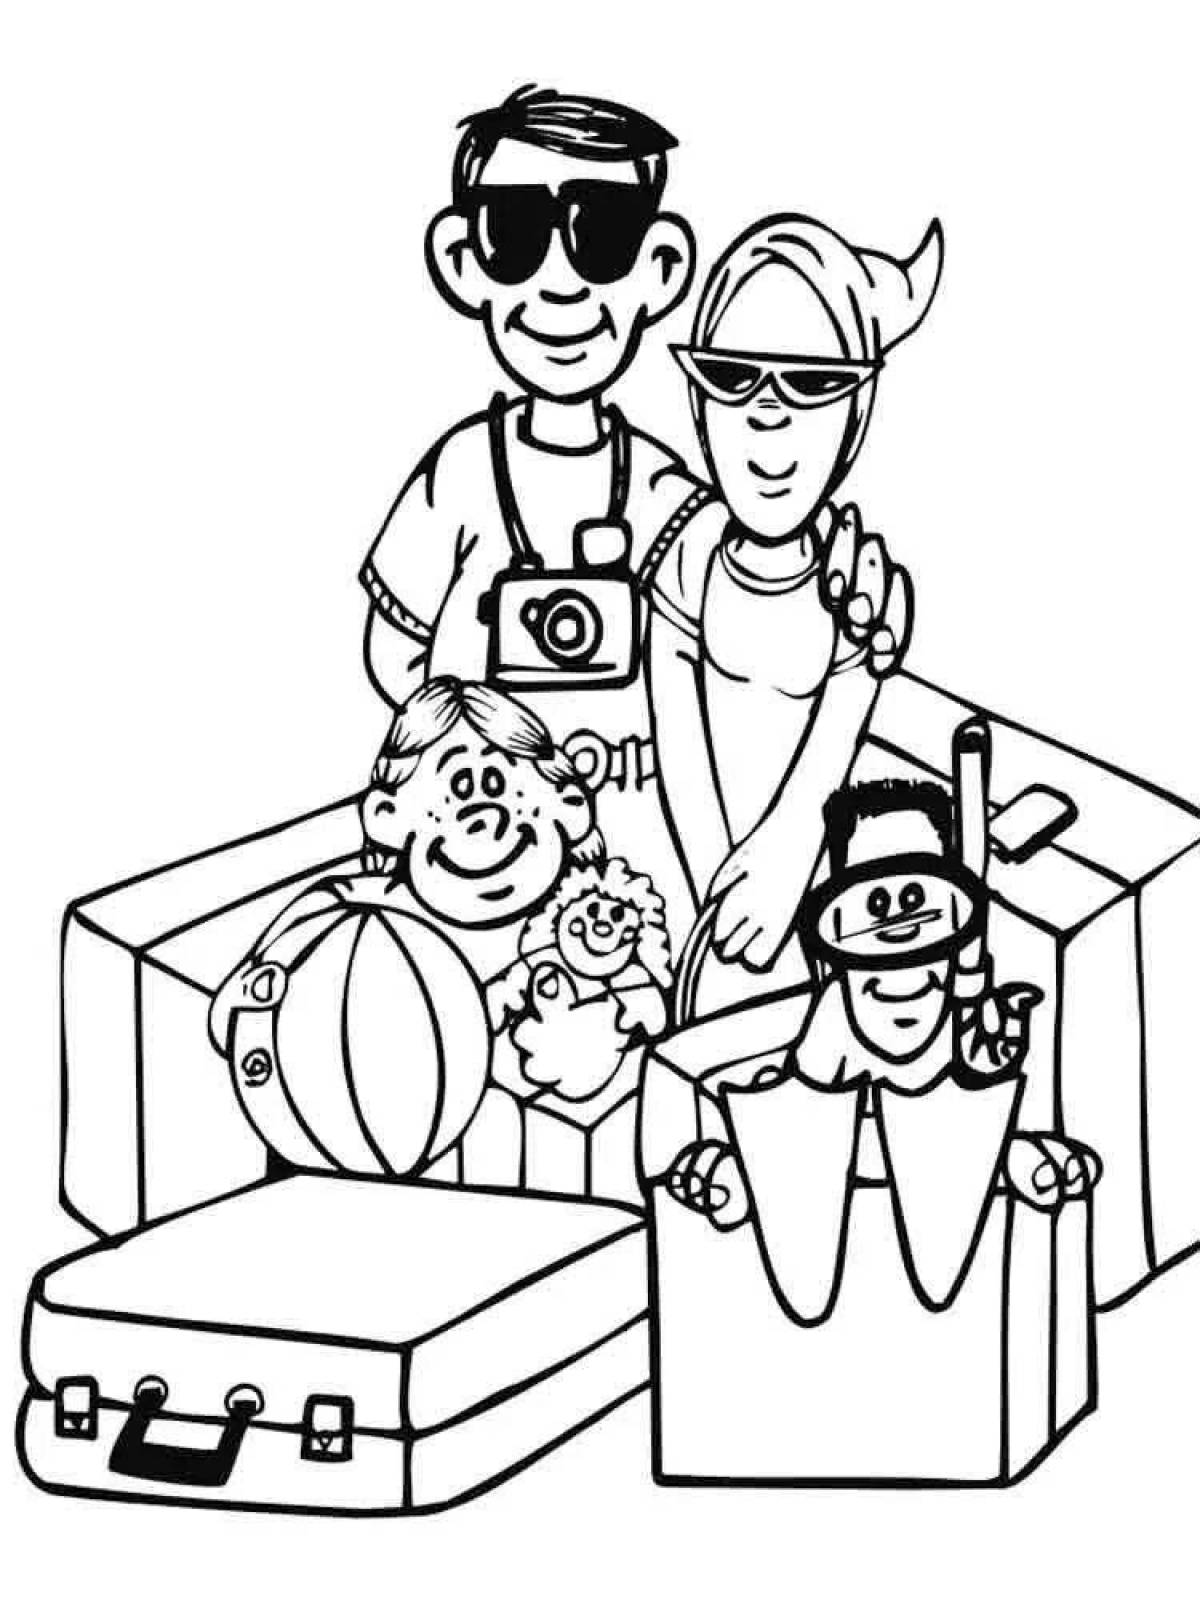 Coloring page peaceful journey